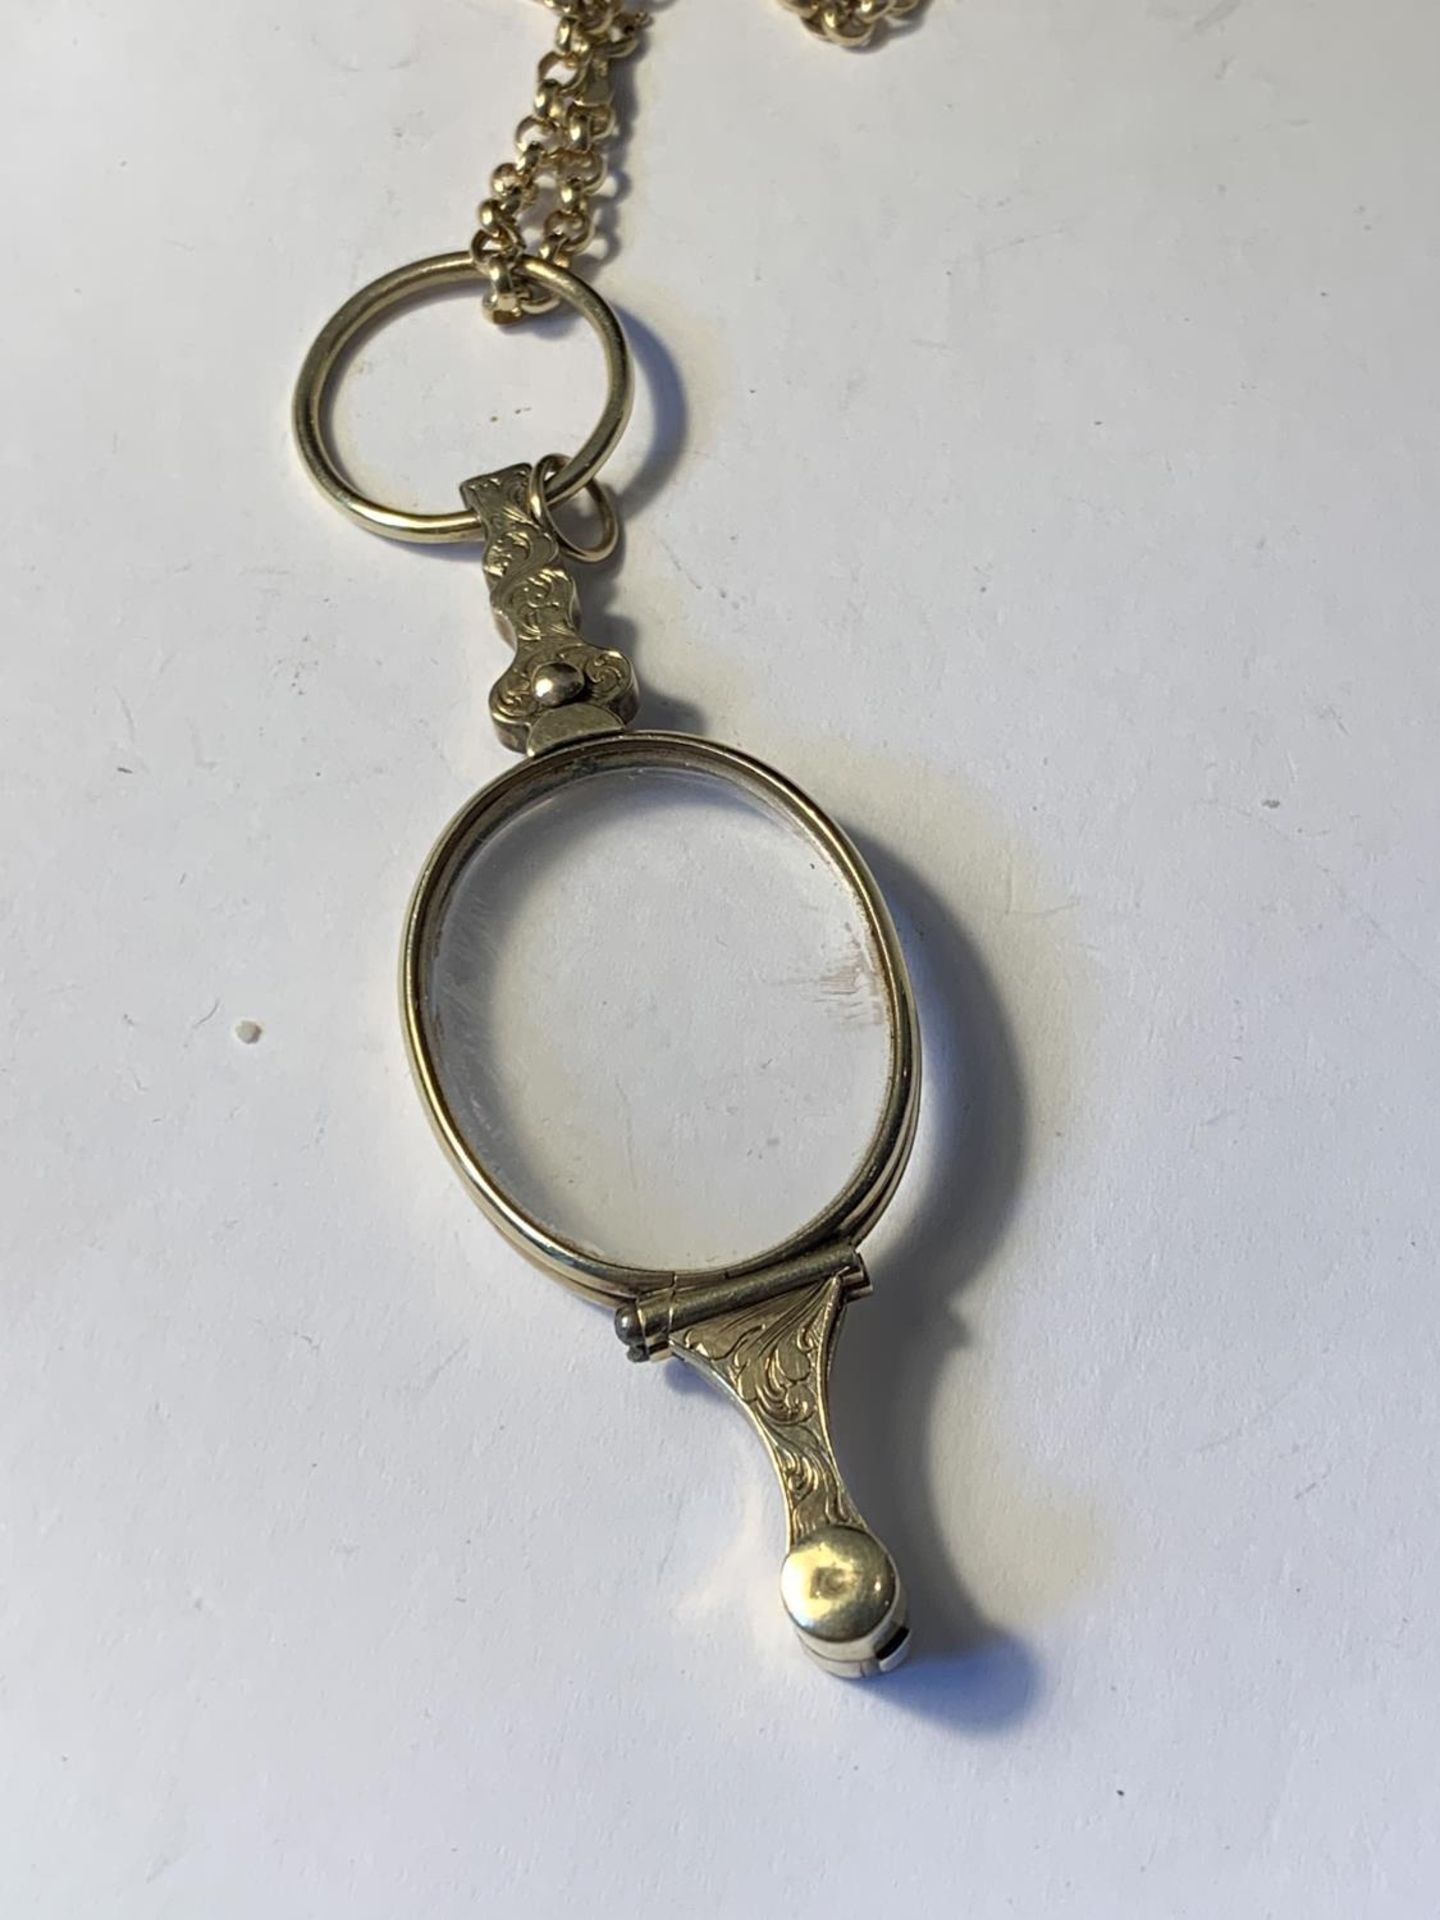 A 9 CARAT GOLD CHAIN GROSS WEIGHT 4.29 GRAMS WITH A PAIR OF GOLD PLATED ORNATE PINCE NEZ - Image 5 of 5